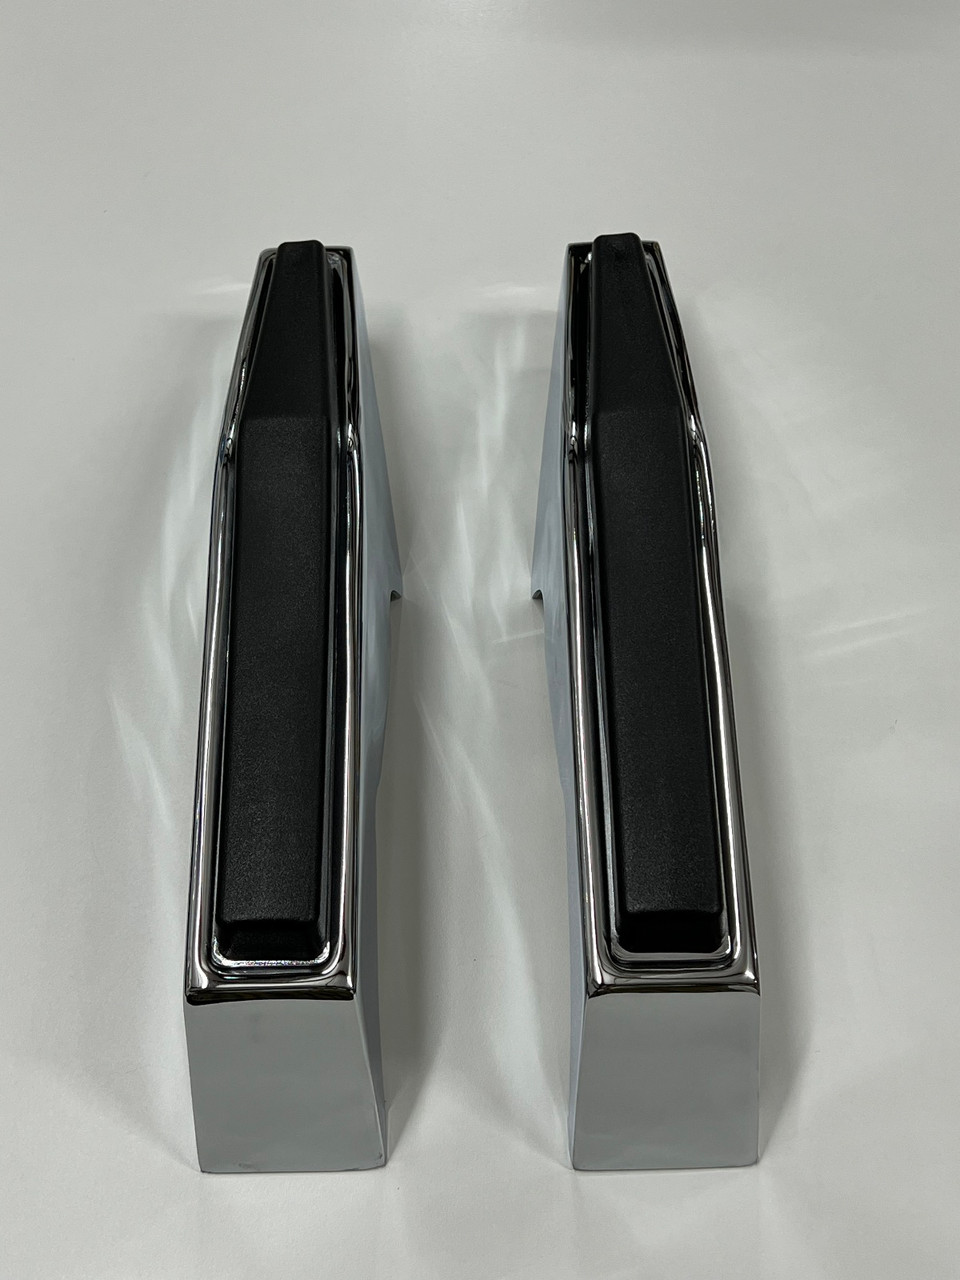 Truck Front Bumper Guards, Chrome - Compatible with Chevrolet and GMC C10 Trucks 1973-1980